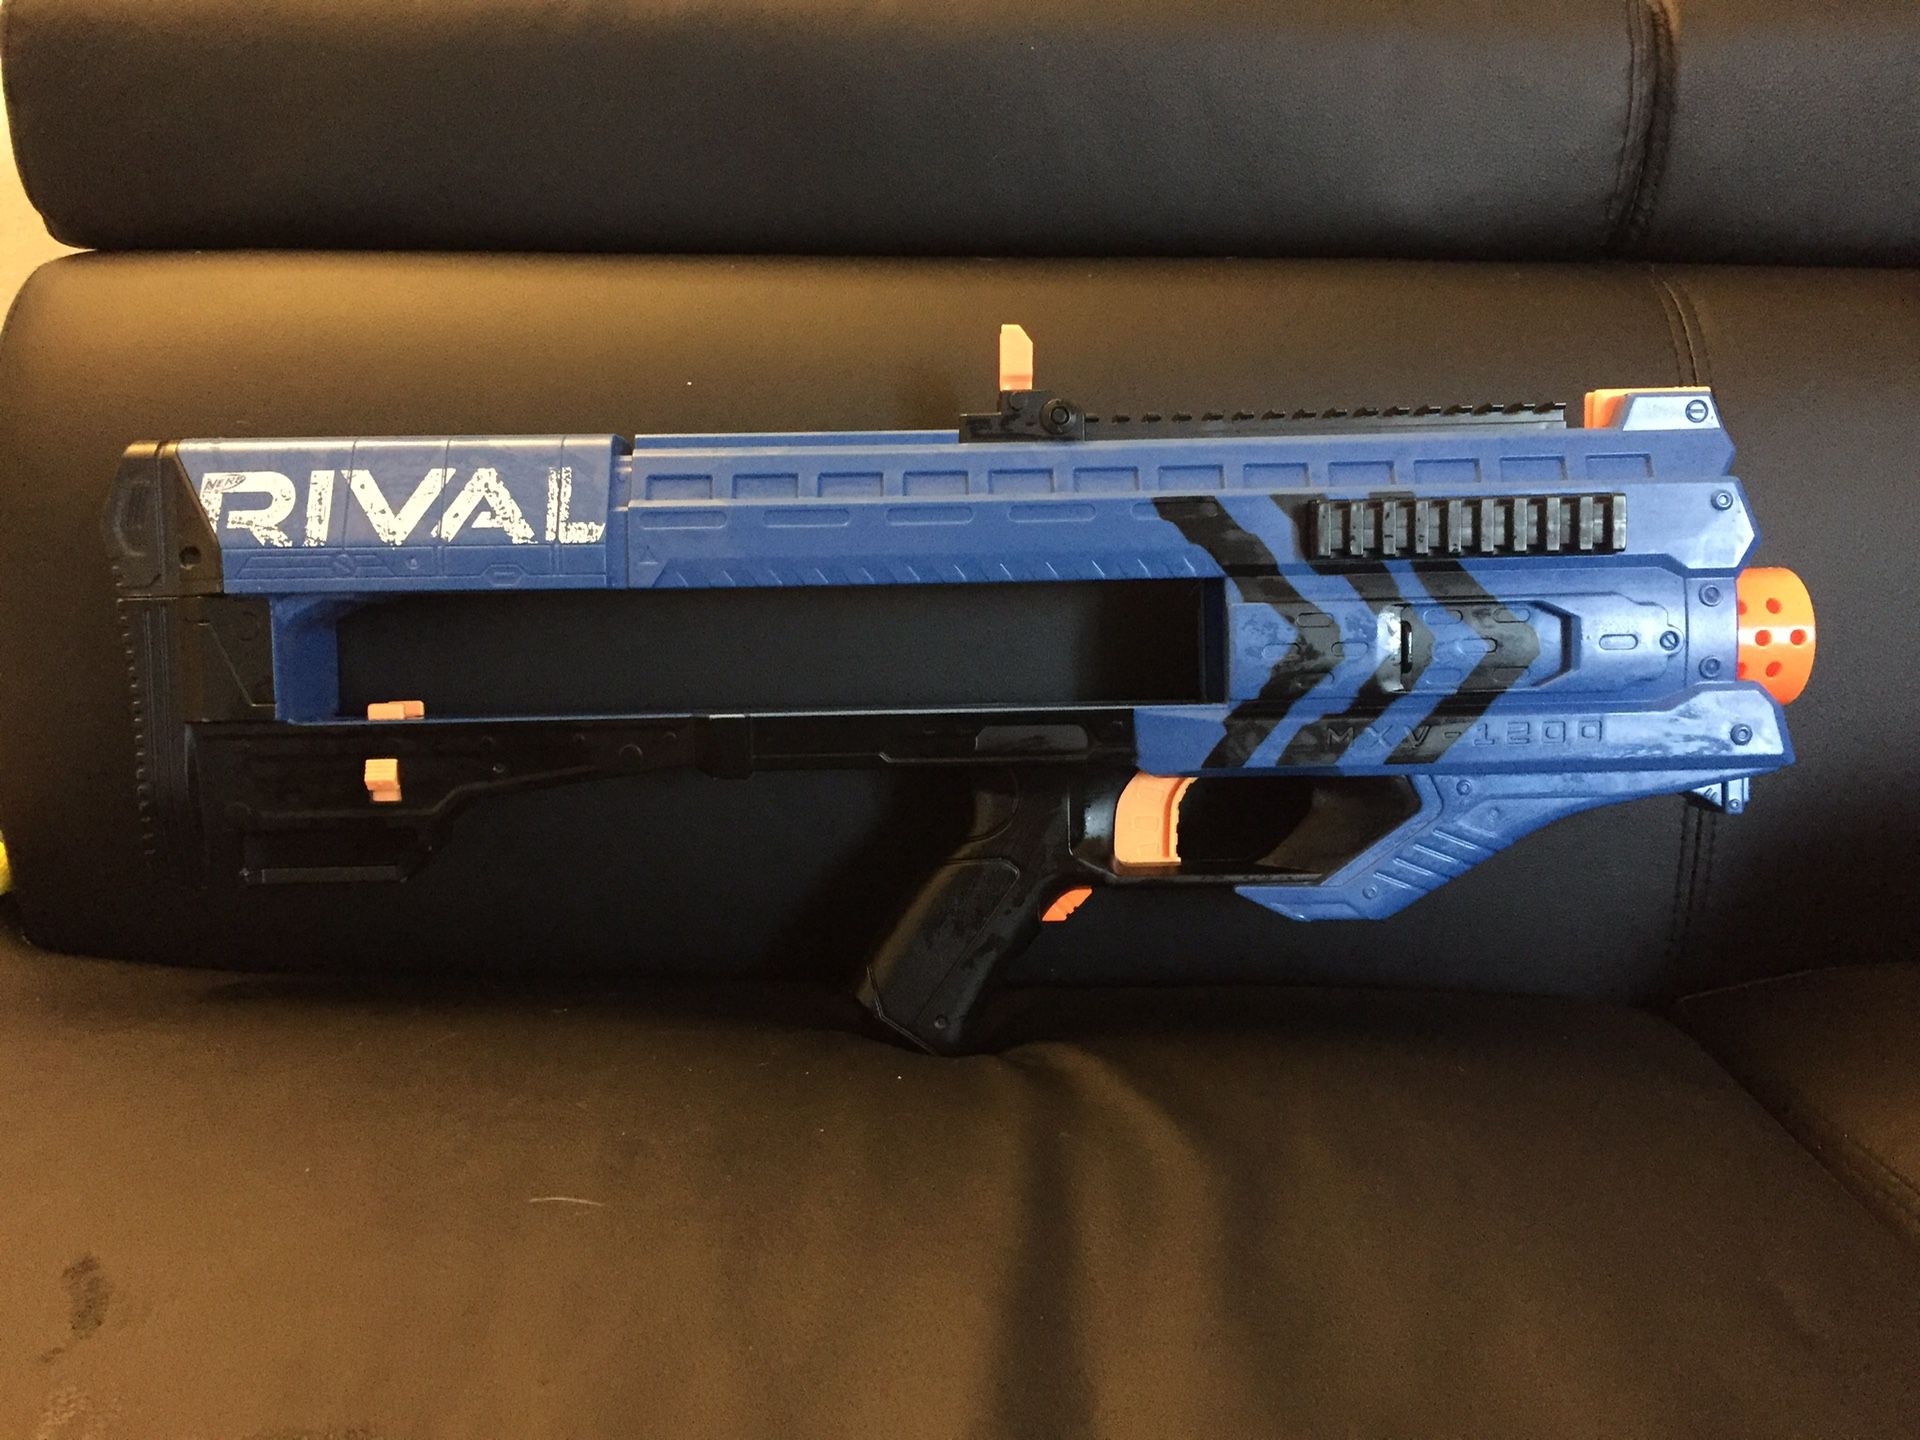 Rival Nerf Gun with Magazines & Ammo